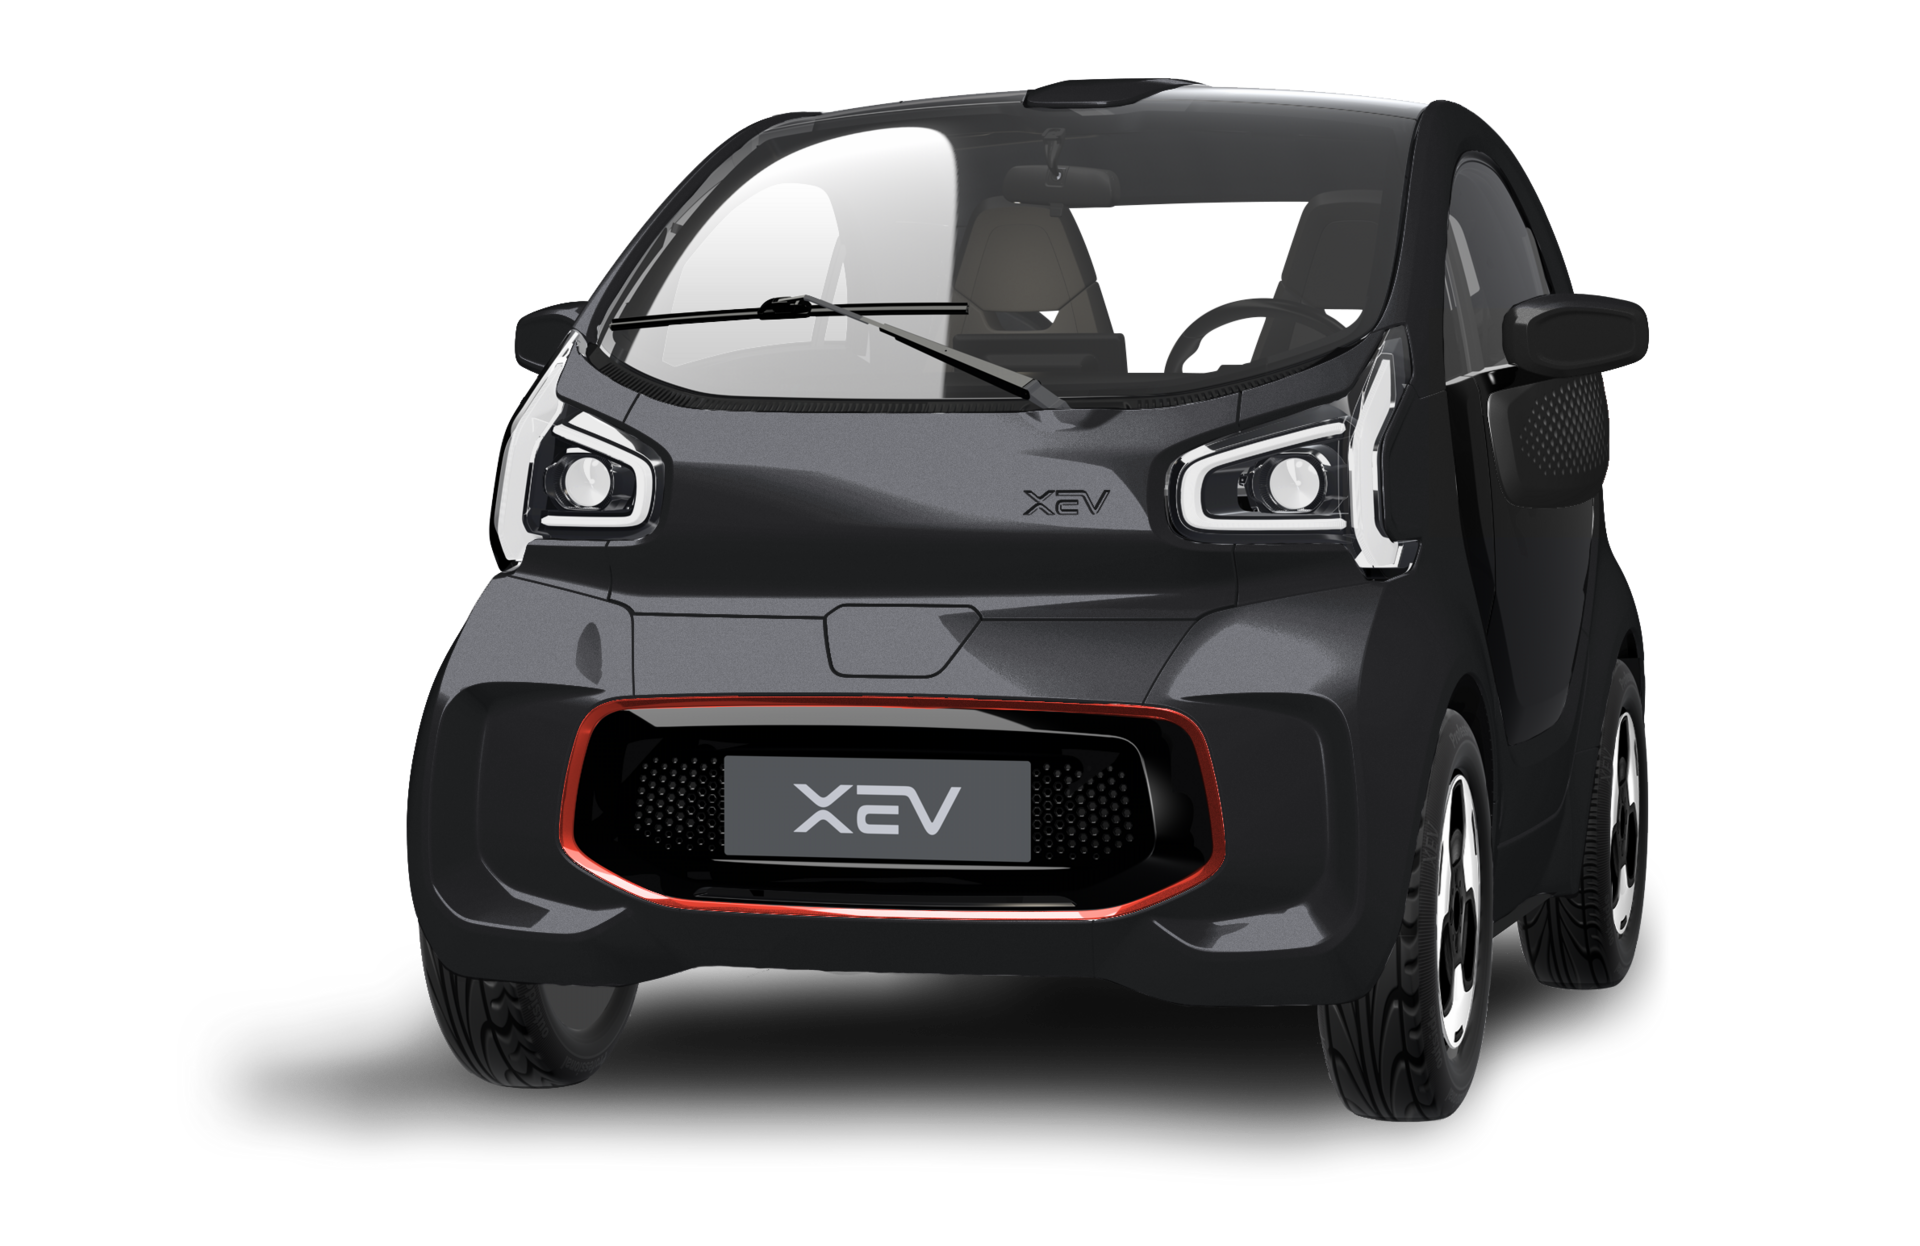 XEV Yoyo Compact in Black pre-registered in SABADELL for € 14,990.-